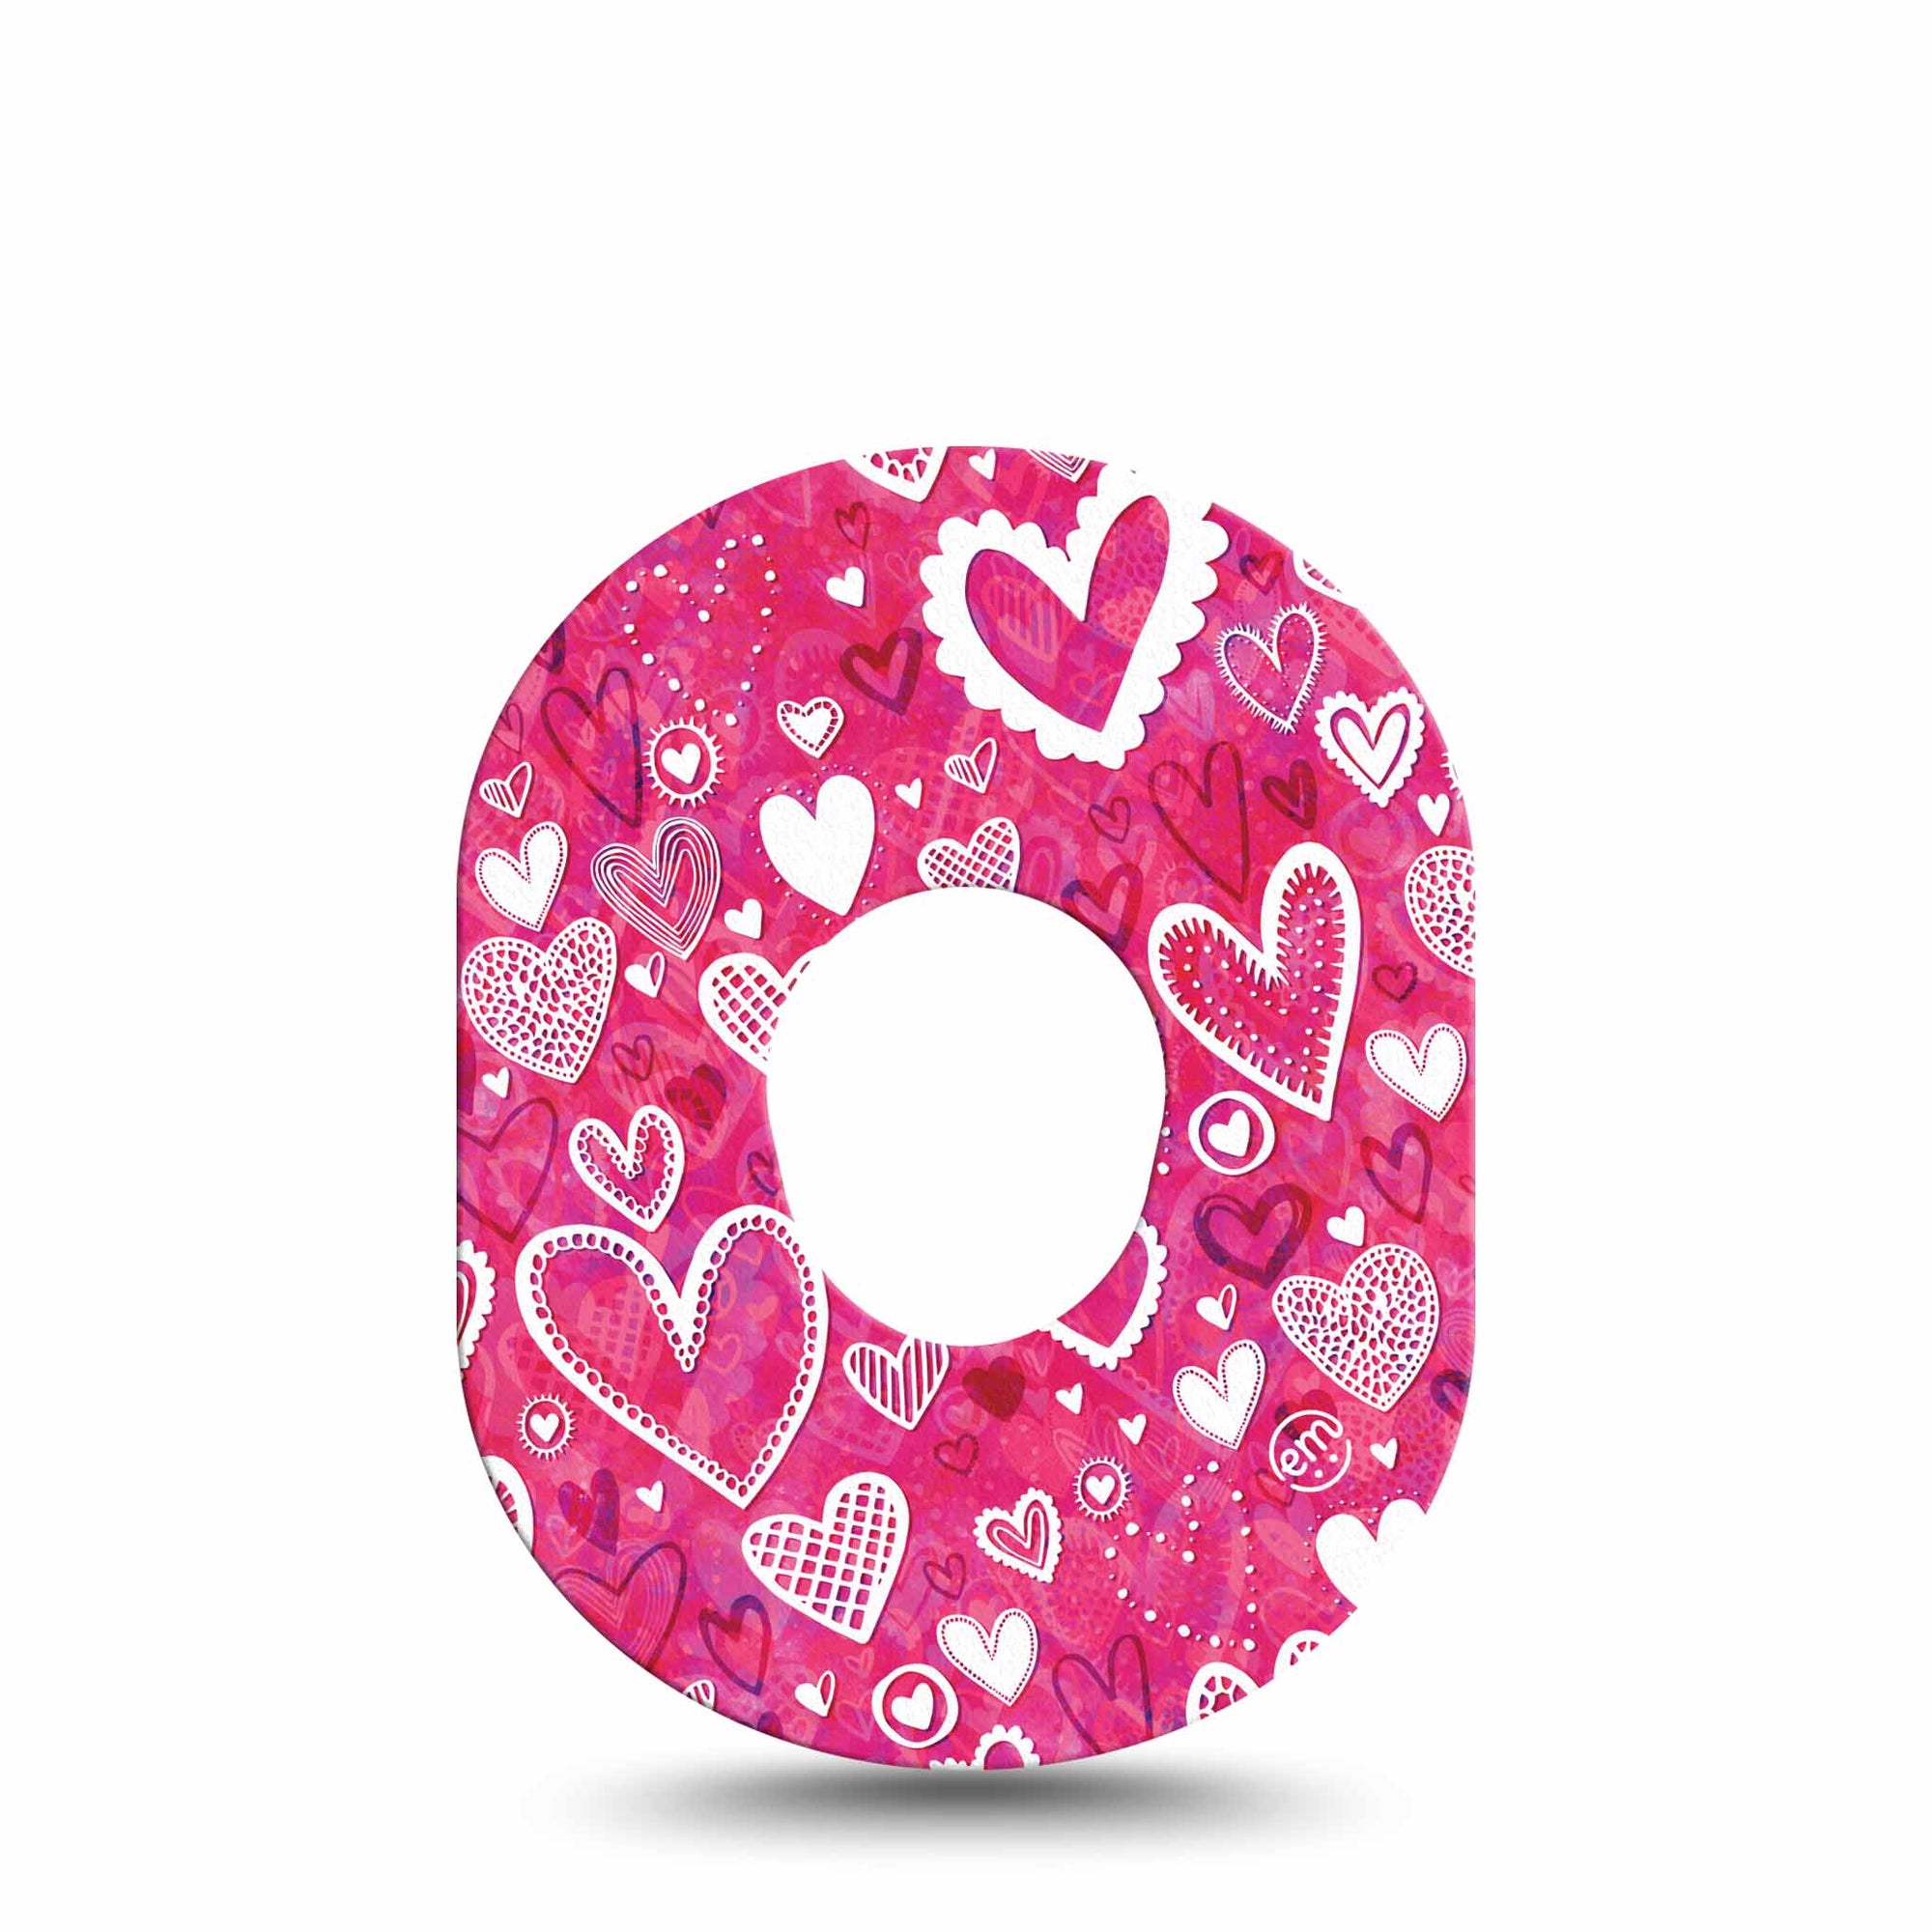 ExpressionMed Whimsical Hearts Dexcom G7 Tape, Single, Cute Hearts Variety Valentine Themed CGM Adhesive Patch Design